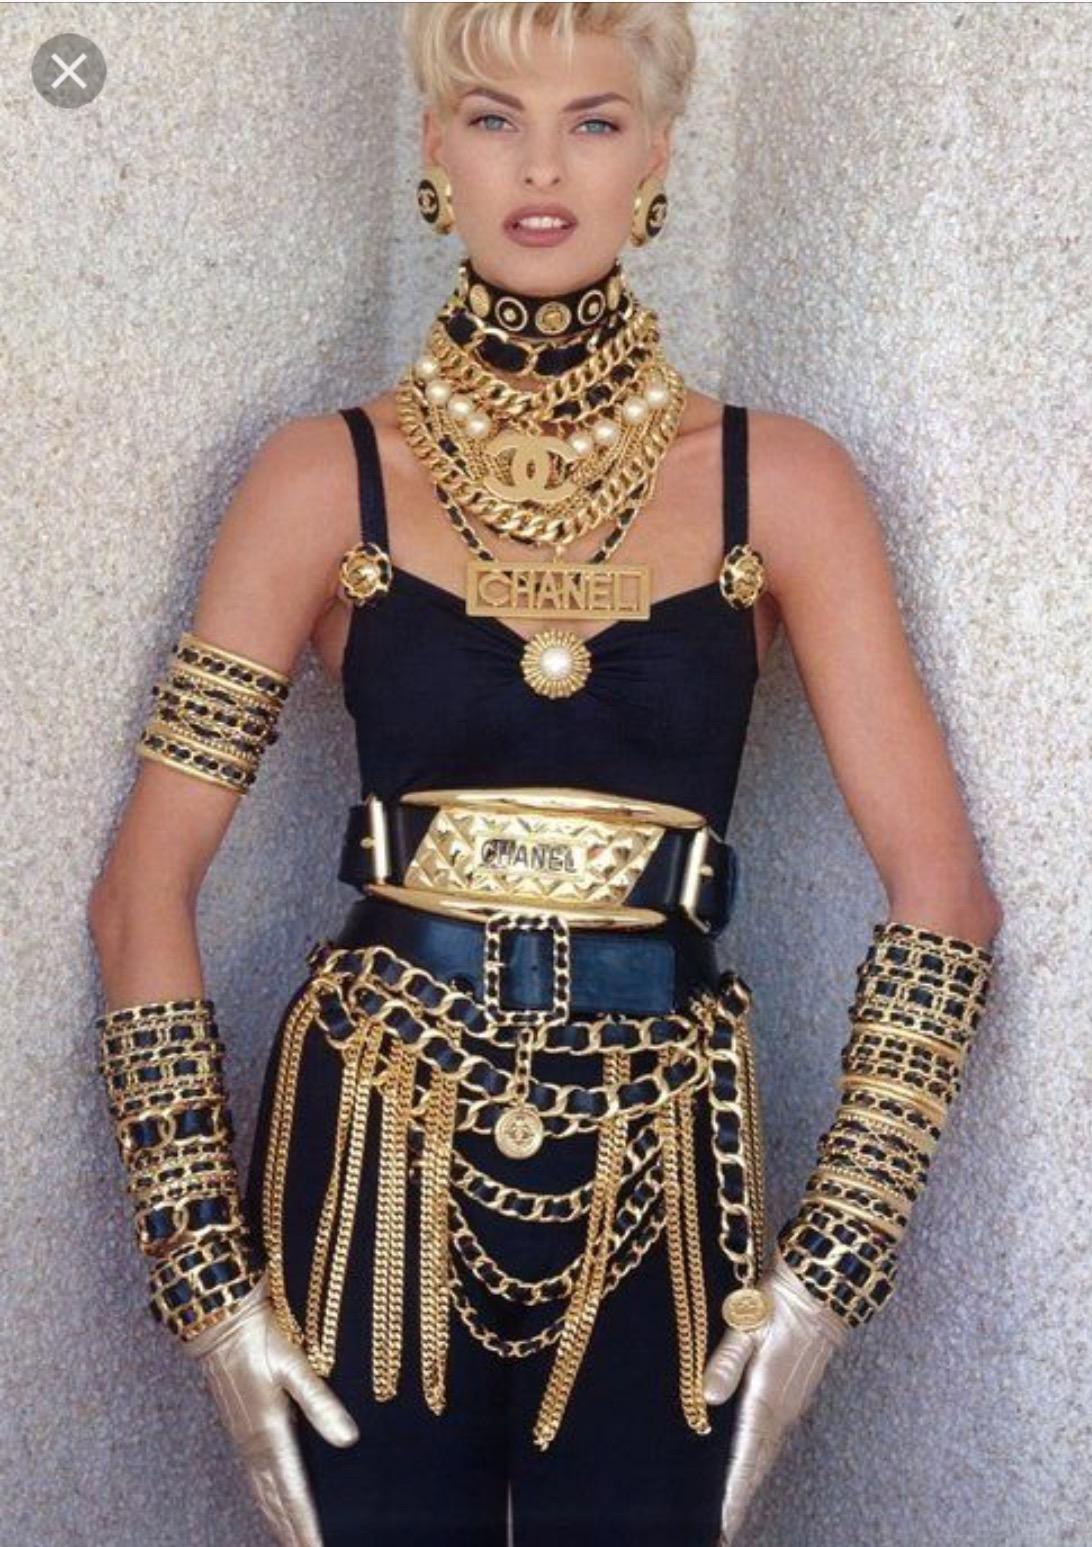 Iconic Chanel motorcycle belt made famous in the 1991 Vogue shoot “Wild at Heart” by Peter Lindbergh, styled by Grace Coddington and starring all the supermodels
Marked 75/30.
Will fit  29